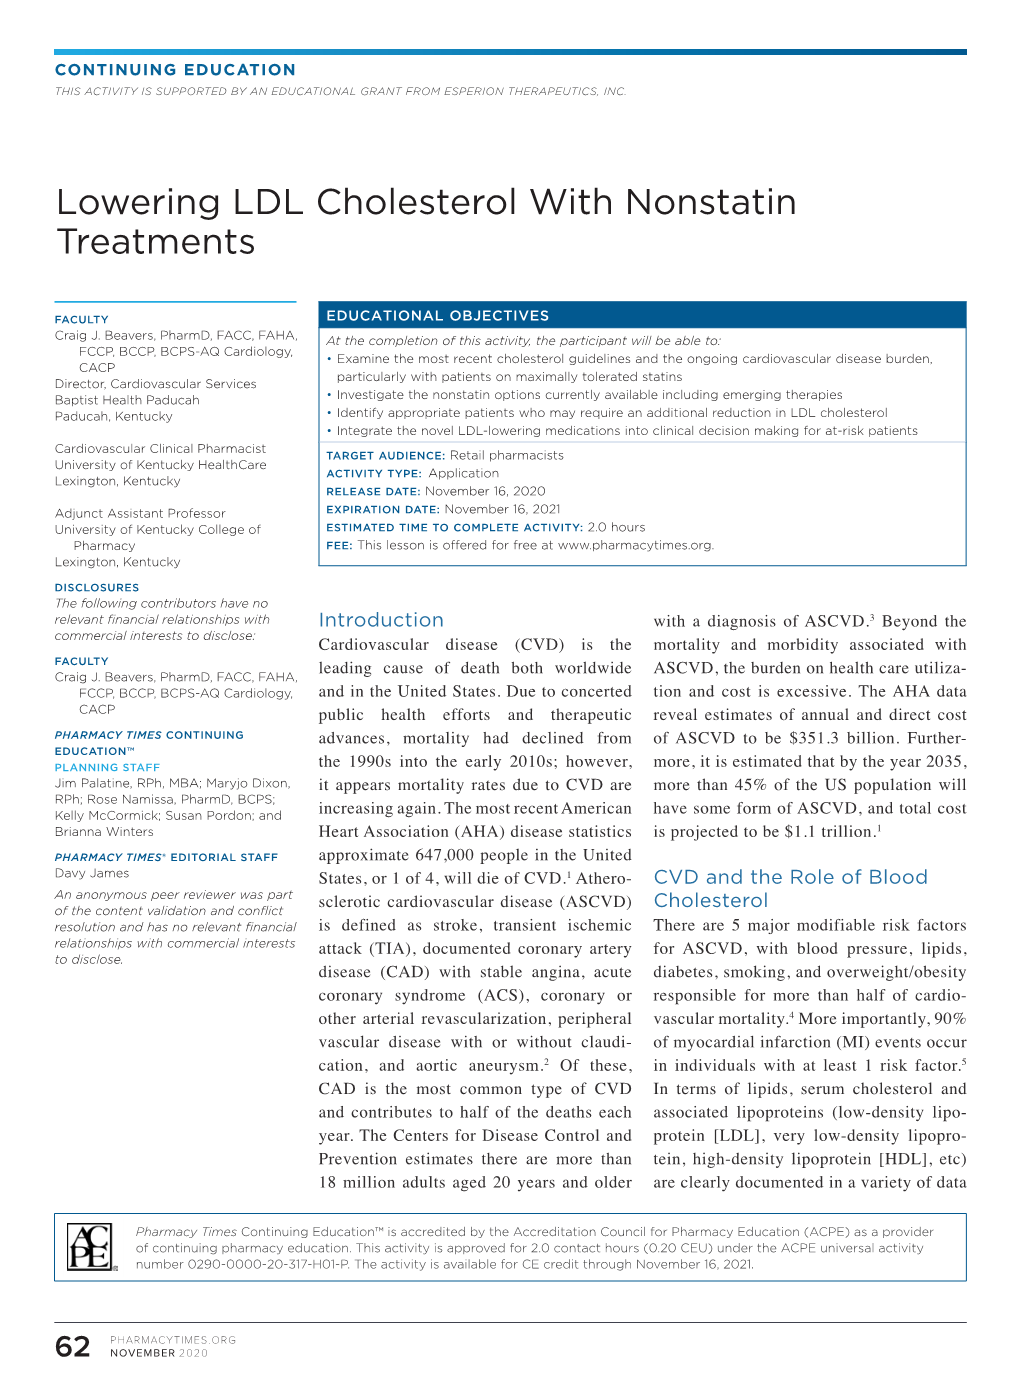 Lowering LDL Cholesterol with Nonstatin Treatments